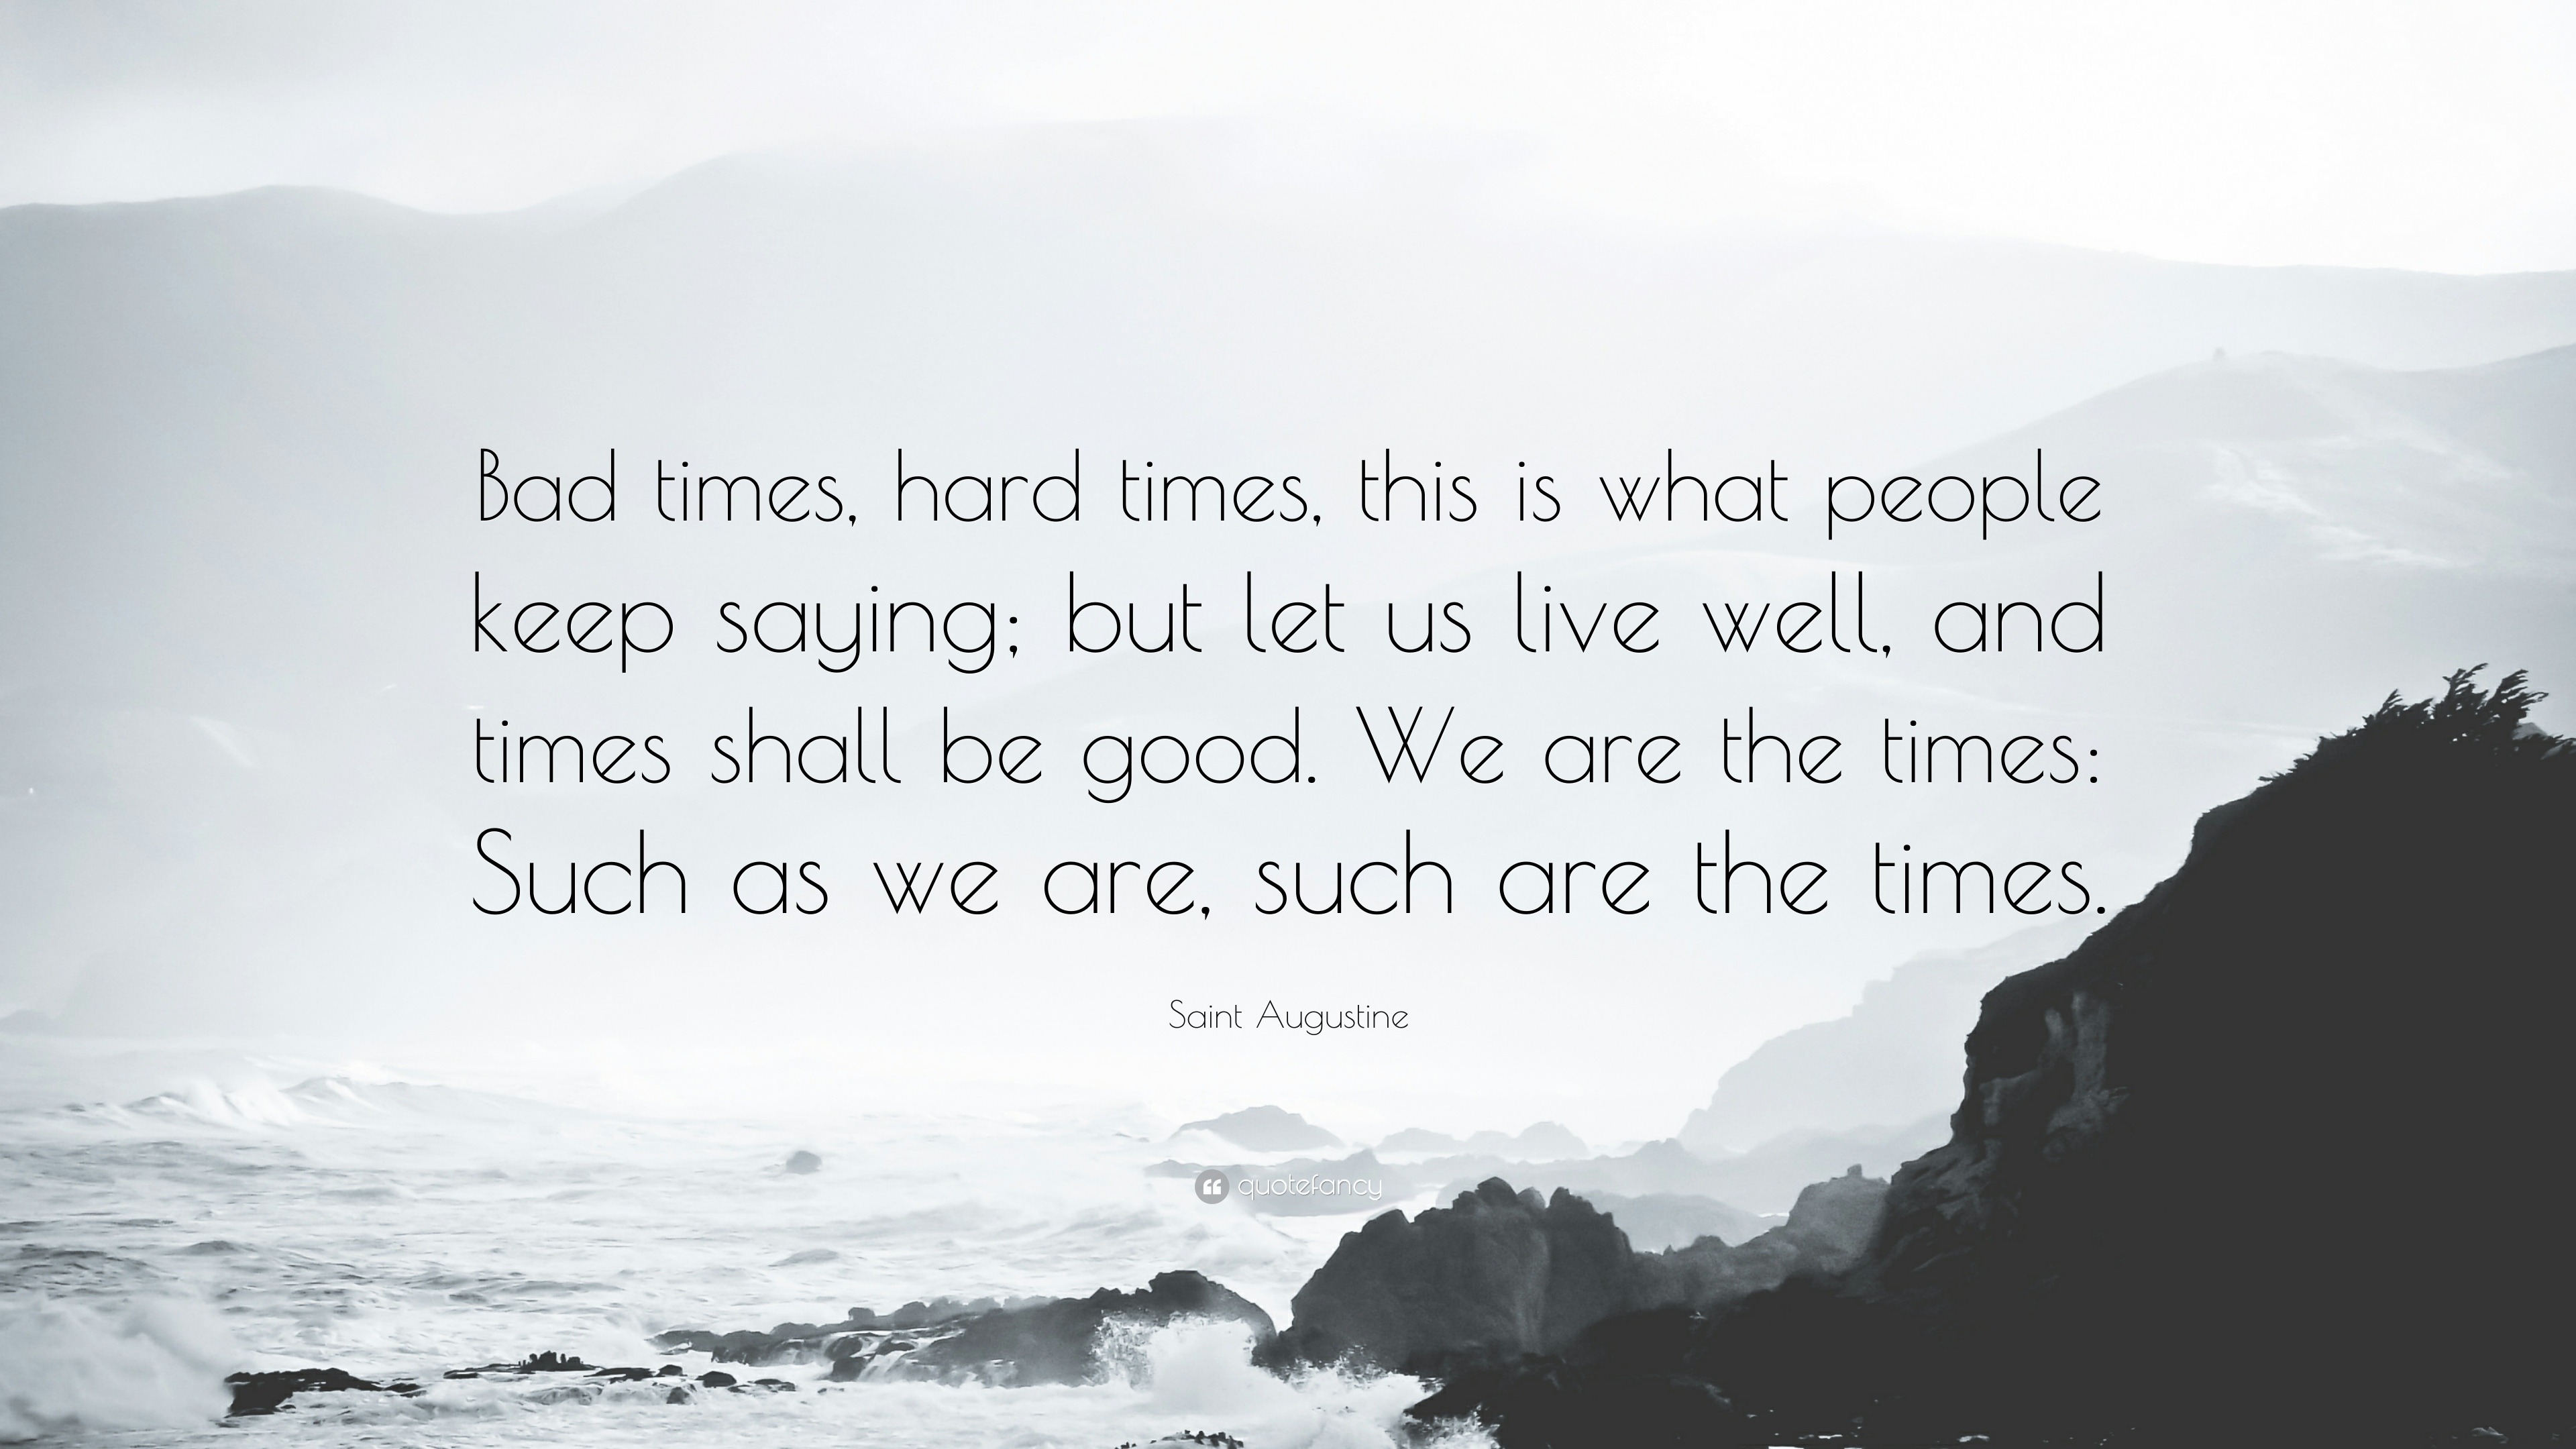 Saint Augustine Quotes: "Bad times, hard times, this is what people ke...